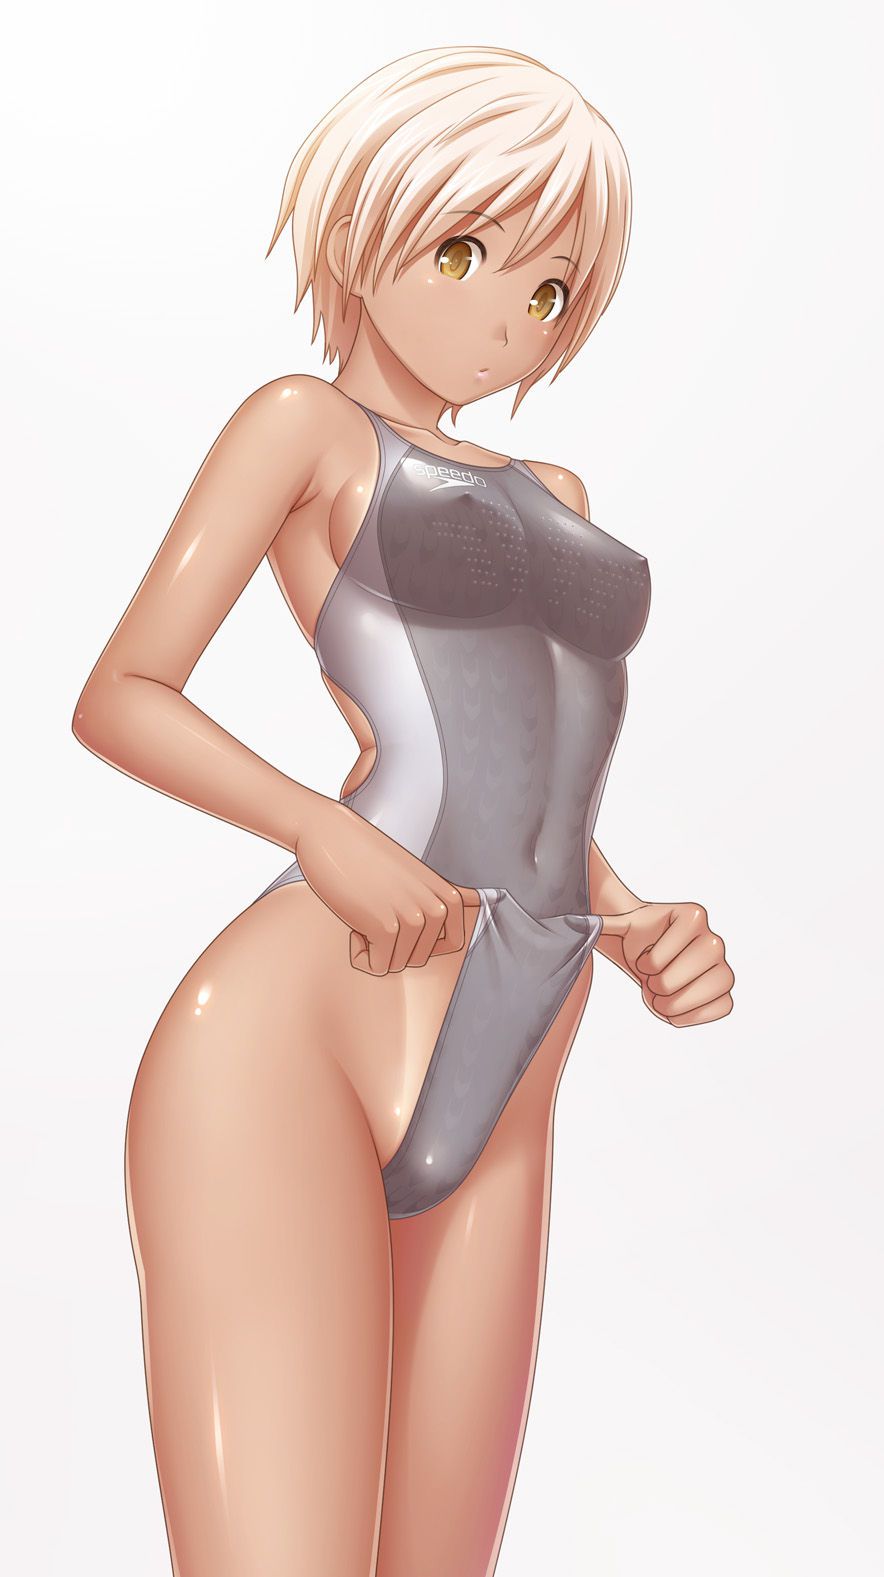 Swimsuit will forever be! Sexy swimsuit no images reminiscent of and seem to feel it is unavoidable, please 19